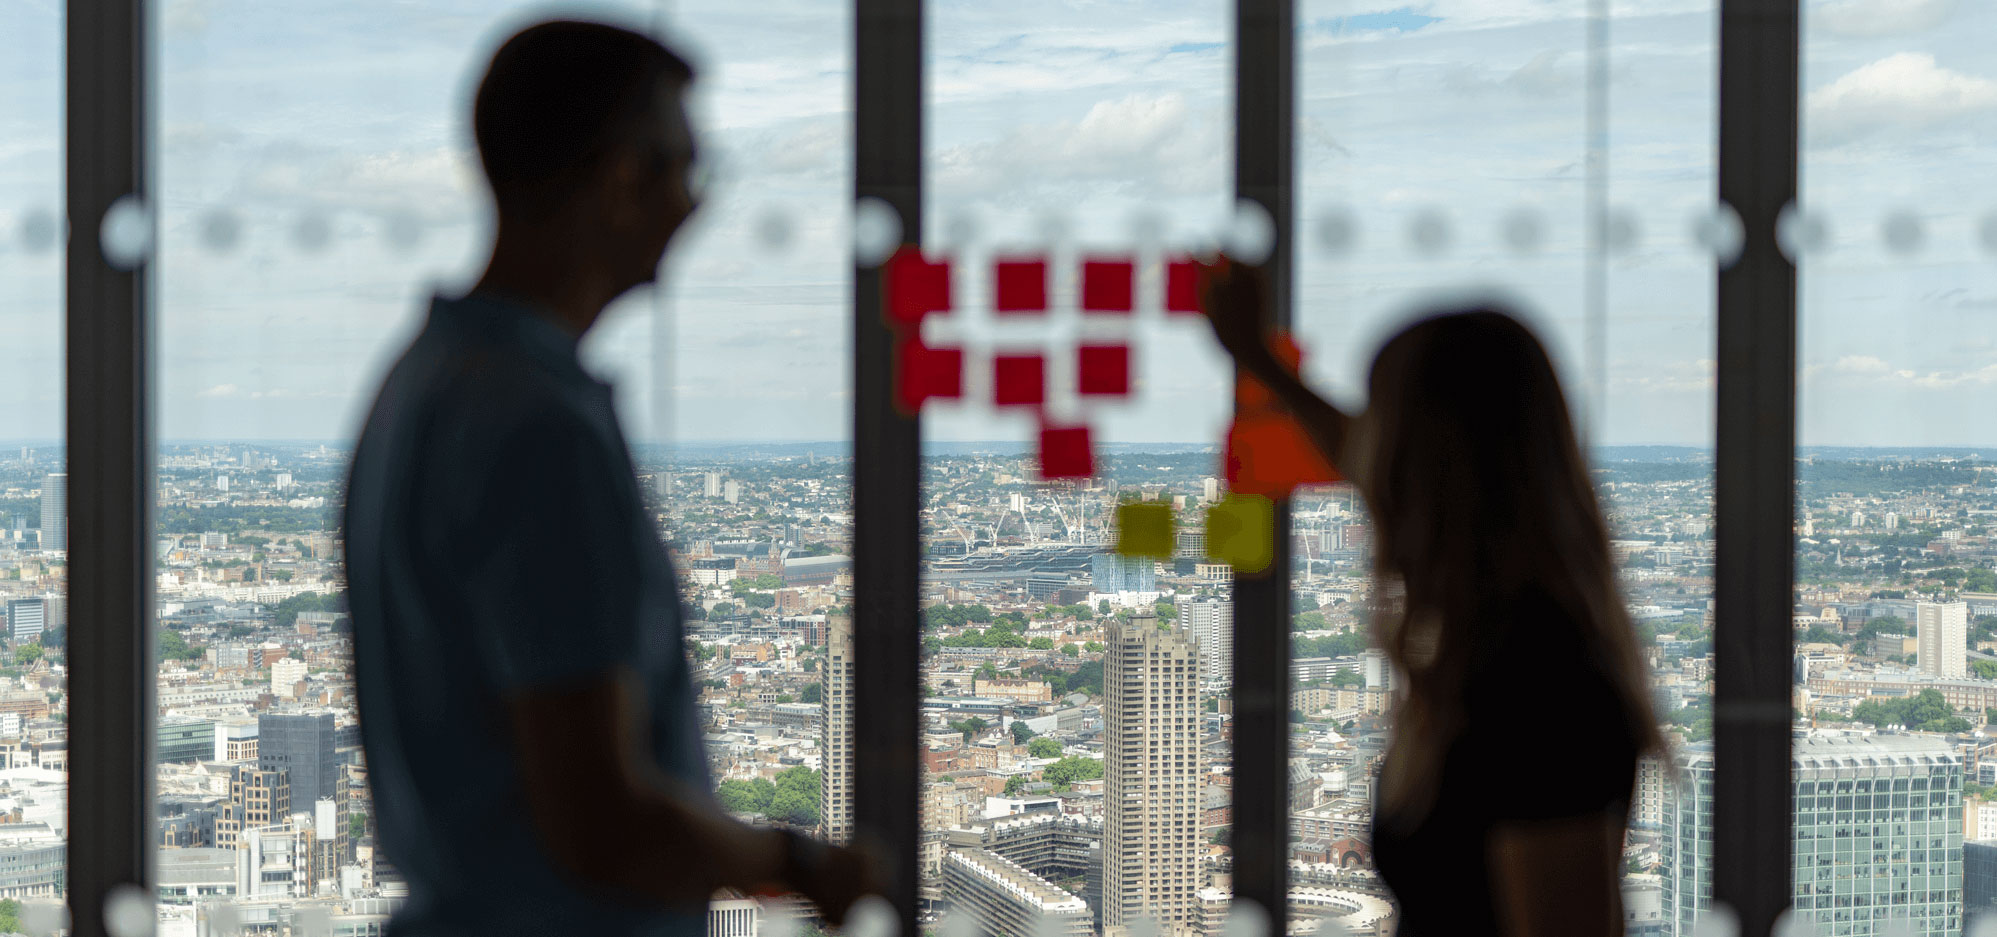 A pair of employees brainstorm new product ideas with sticky notes against glass wall